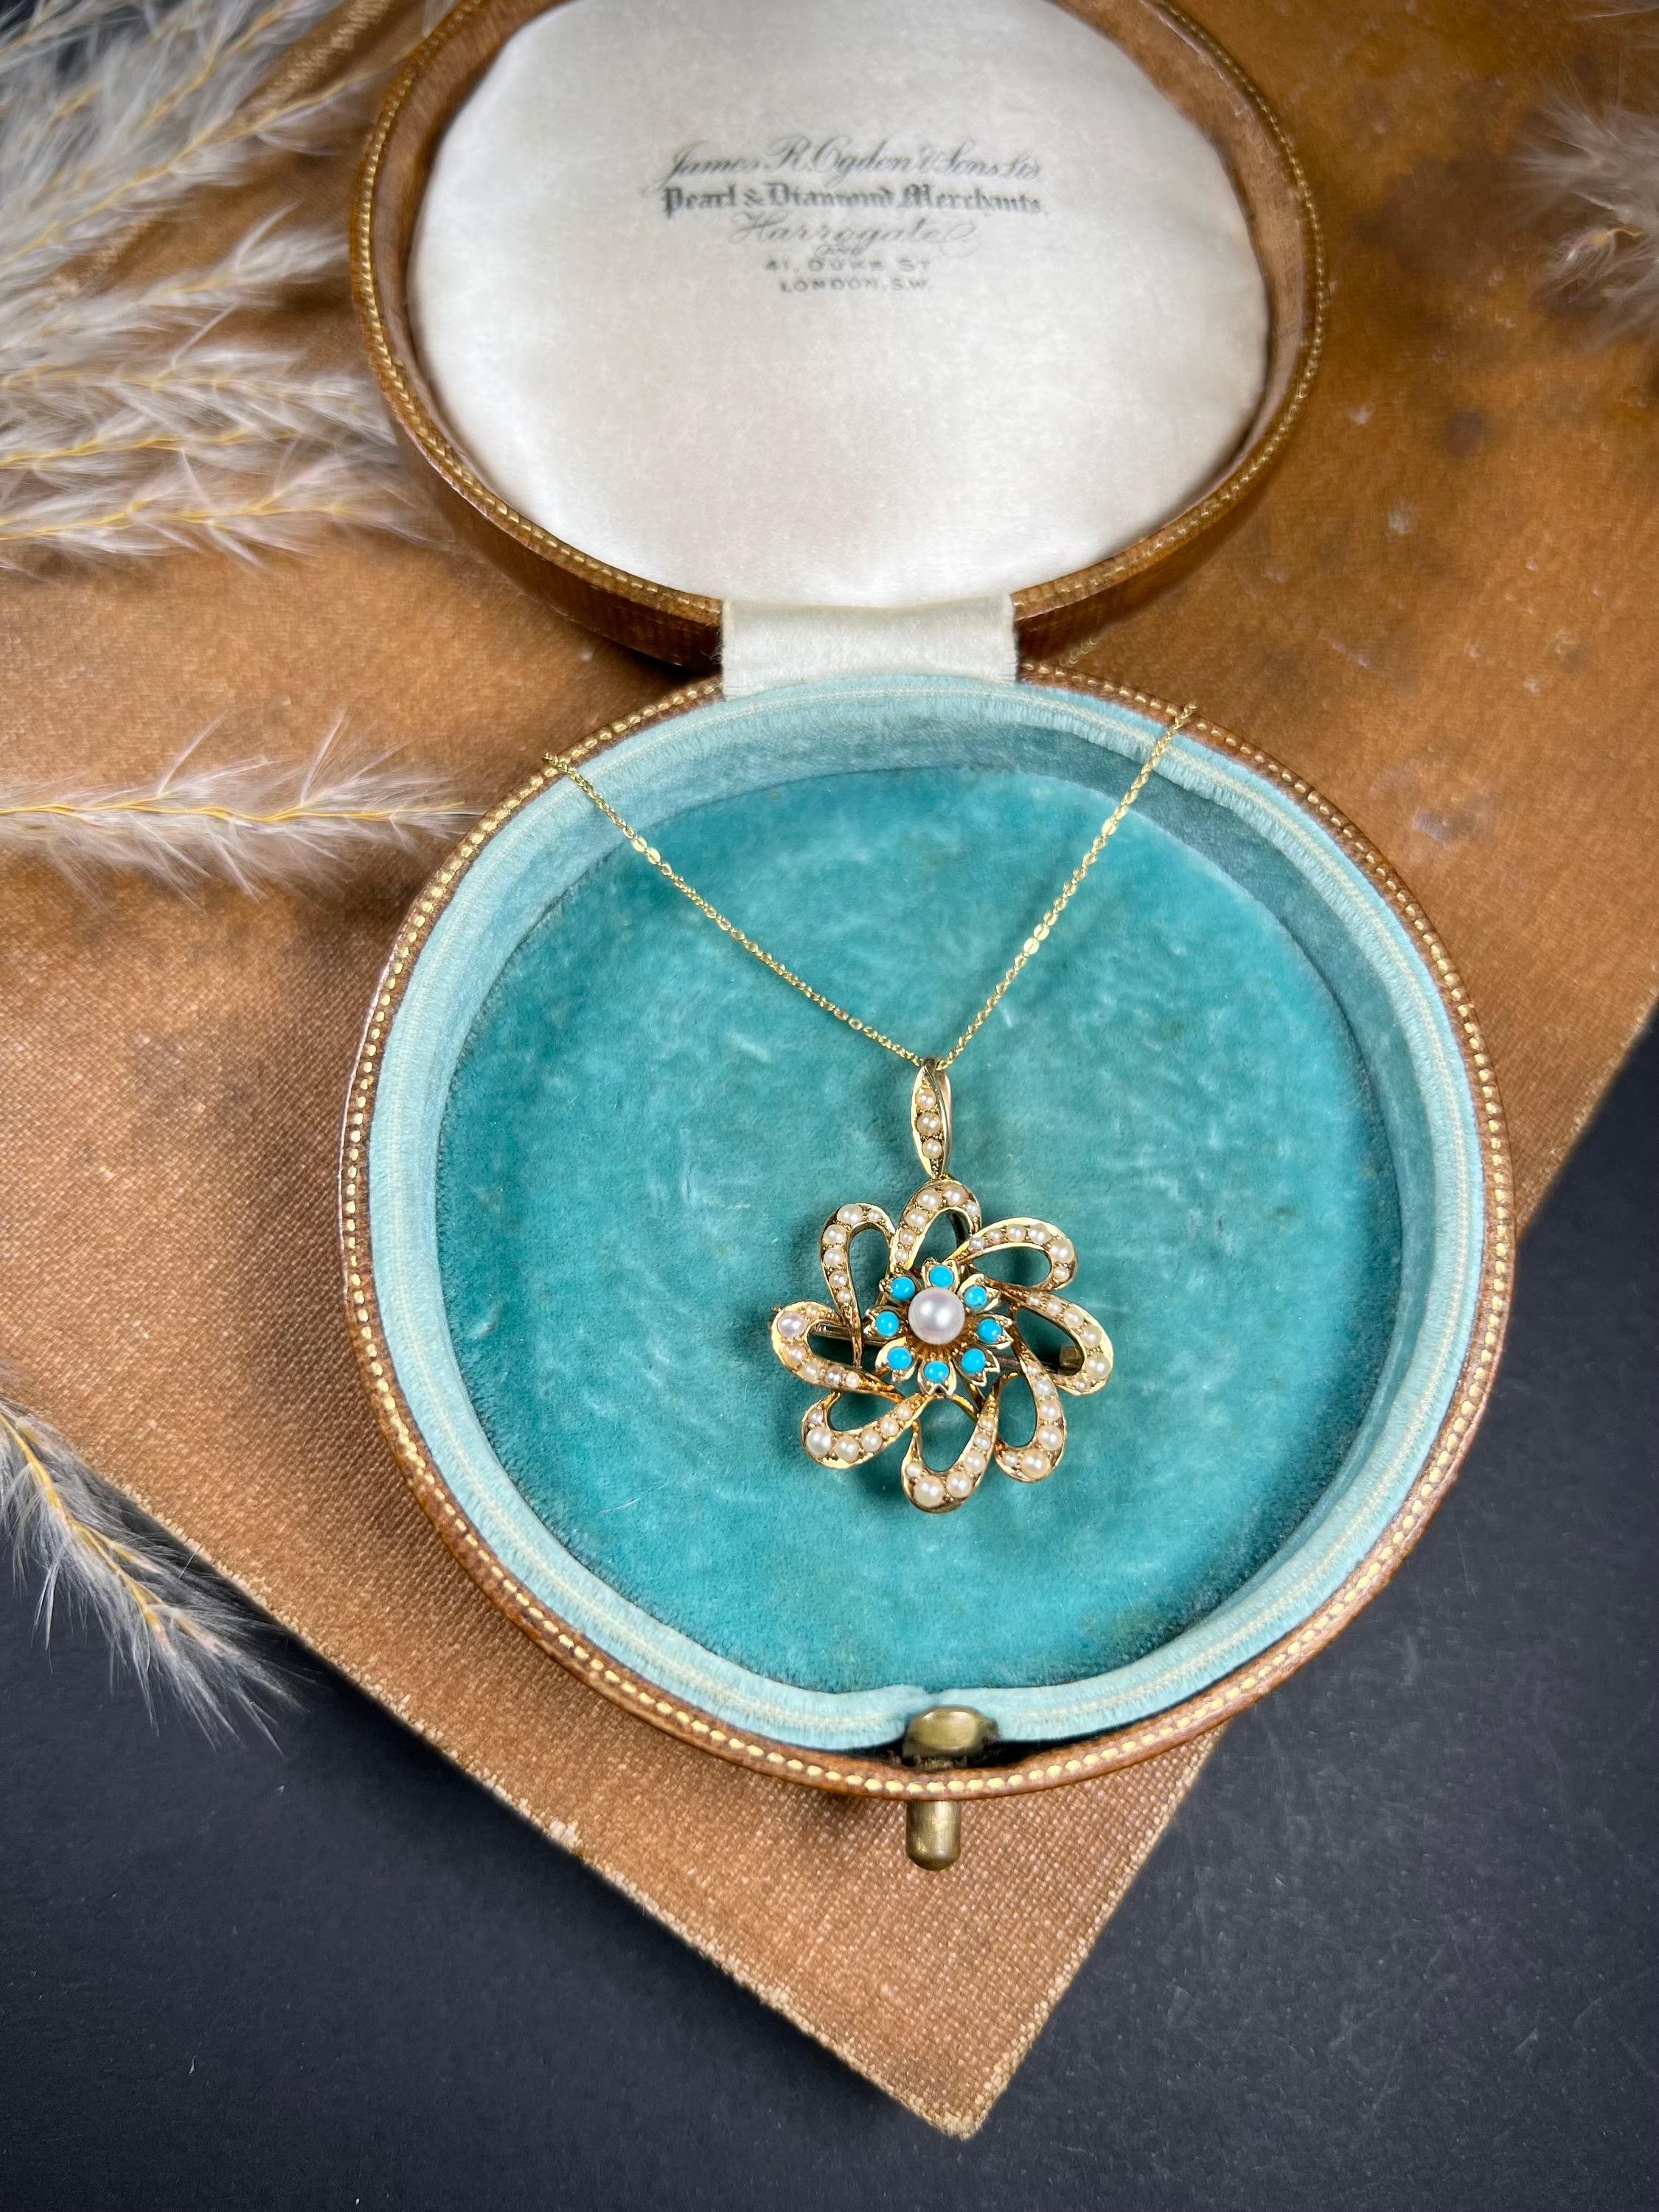 Antique 15ct Gold Edwardian Pearl & Turquoise Flower Pendant For Sale 4